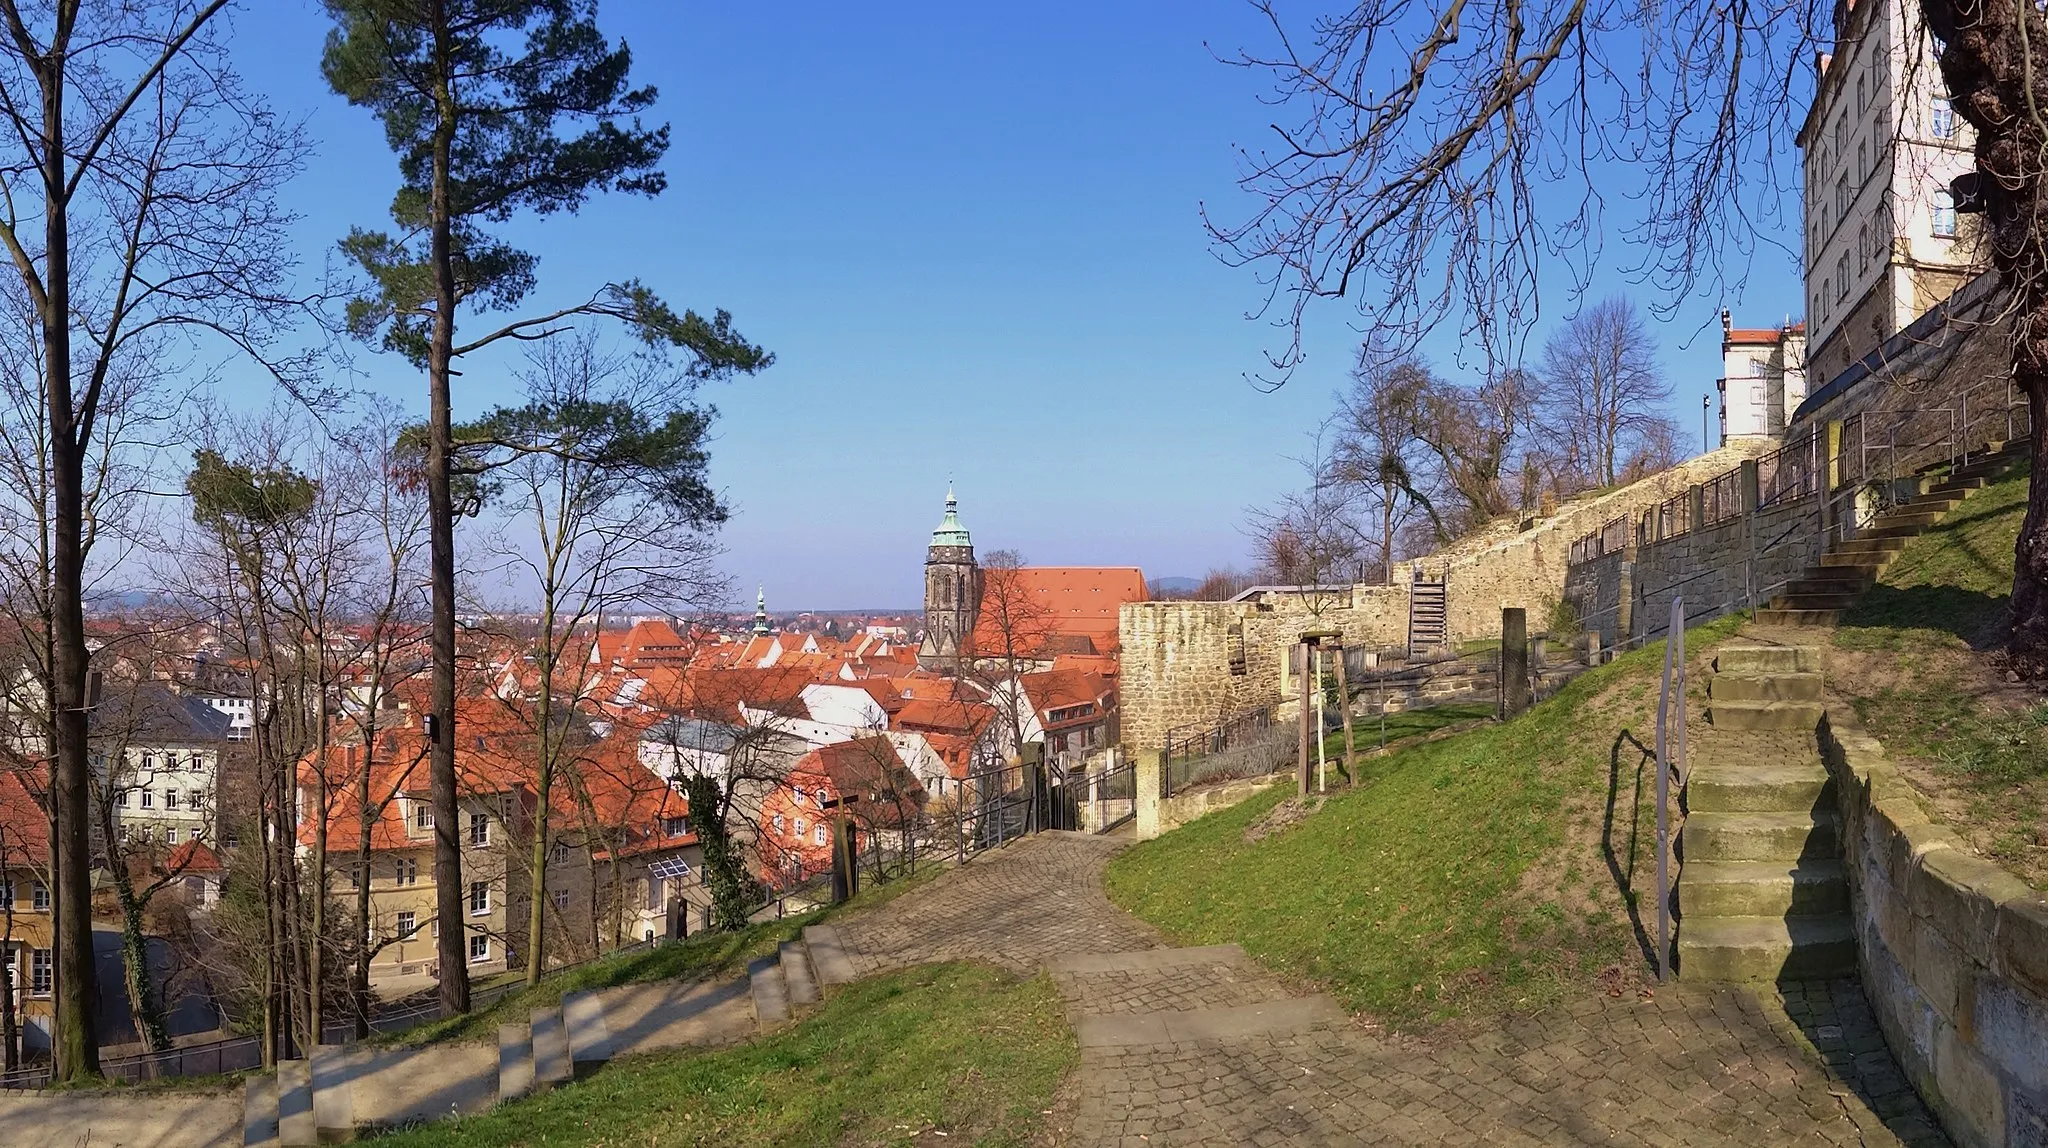 Photo showing: The Human rights memorial Castle-Fortress Sonnenstein in Pirna's old-town.